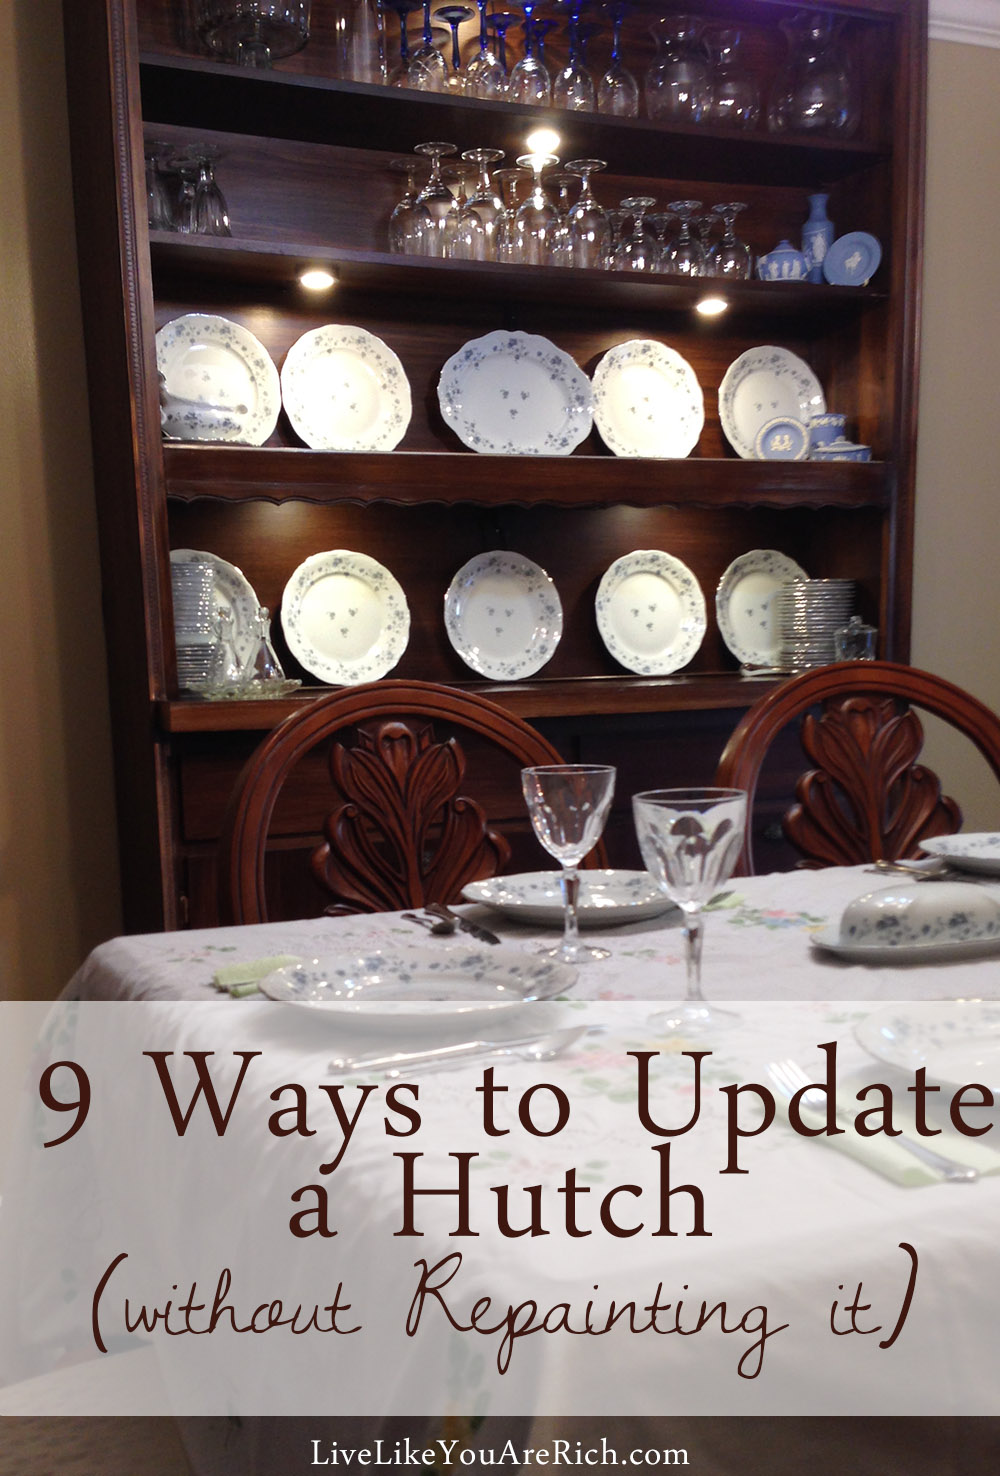 9 Ways to Update a Hutch without Repainting it